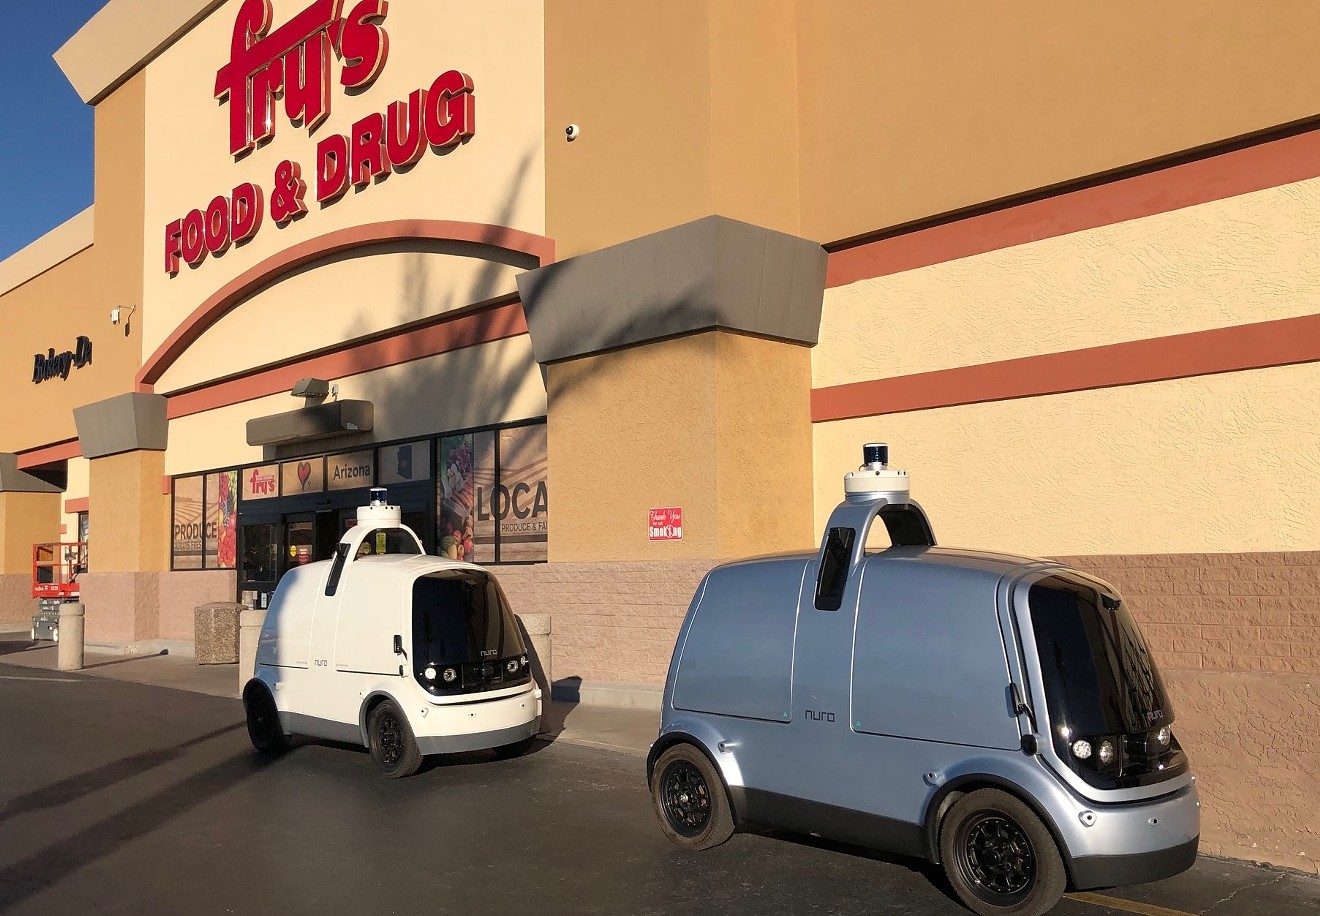 Nuro R1 vehicles began driverless delivery service at a Scottsdale Fry's store on Tuesday.